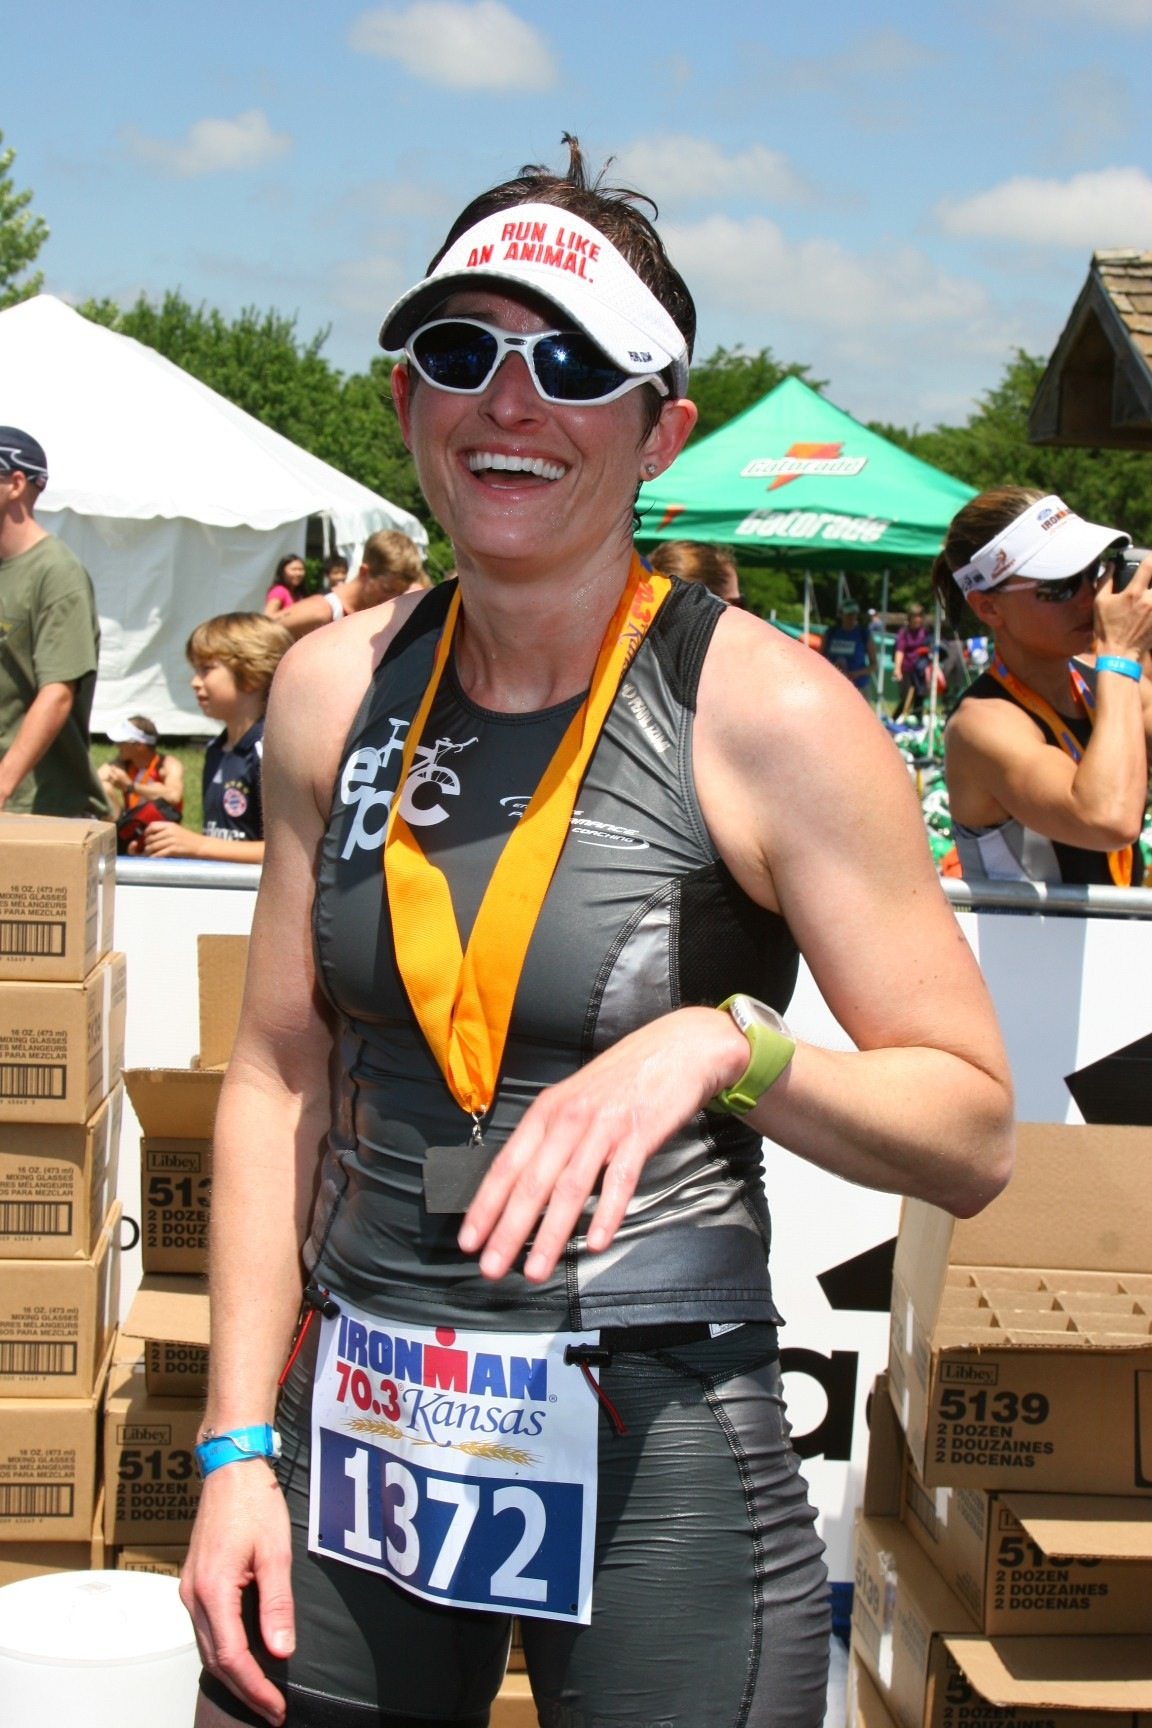 A quick trip recap. And the small matter of a half-Ironman this Sunday ...